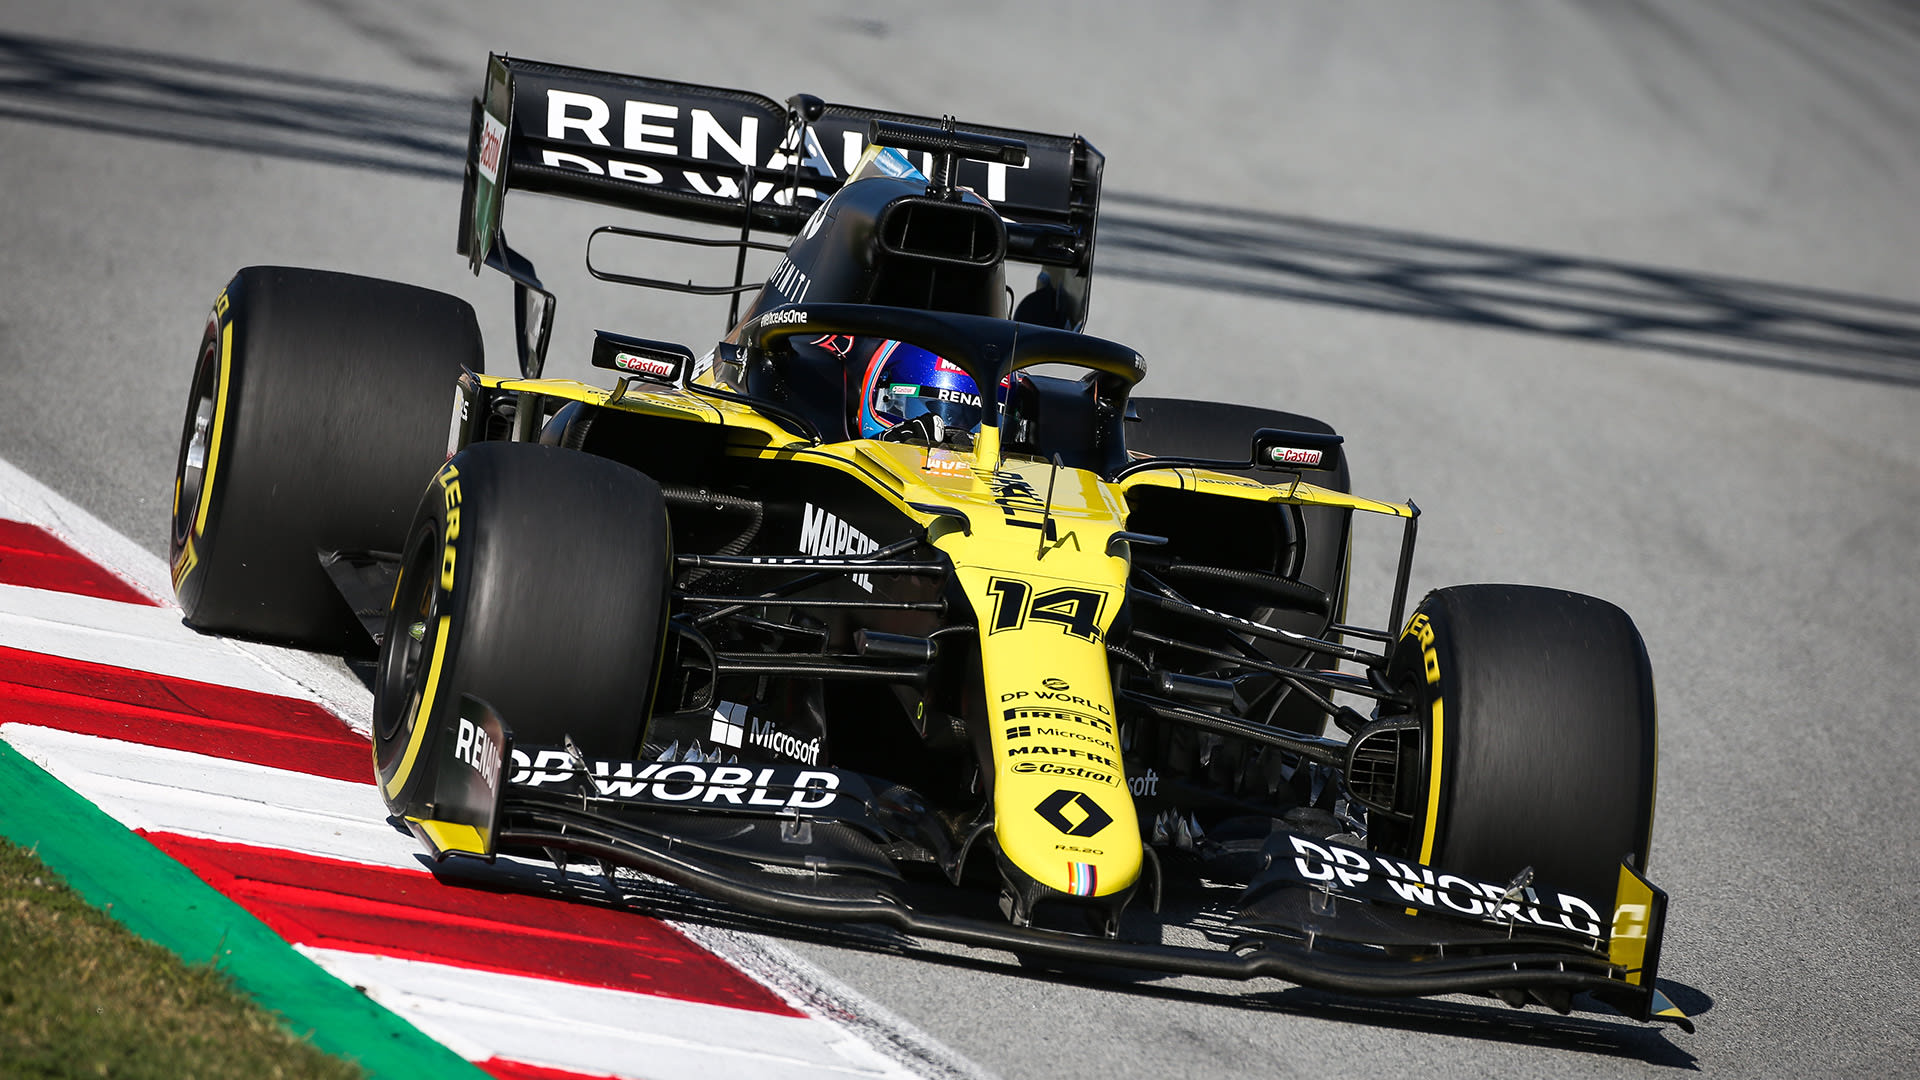 Tech F1i: A visit to Renault at Enstone - The Simulator